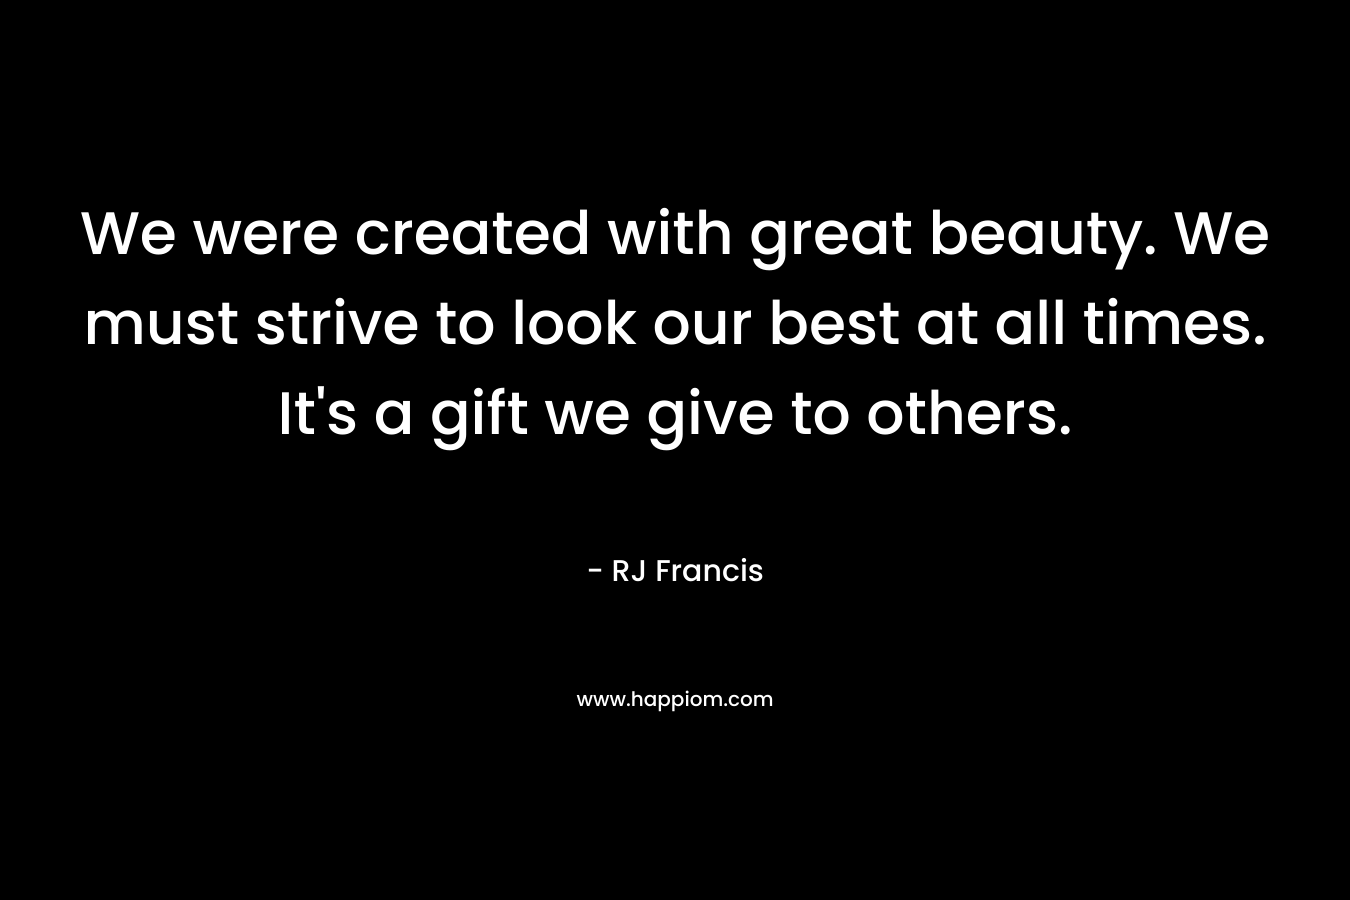 We were created with great beauty. We must strive to look our best at all times. It's a gift we give to others.